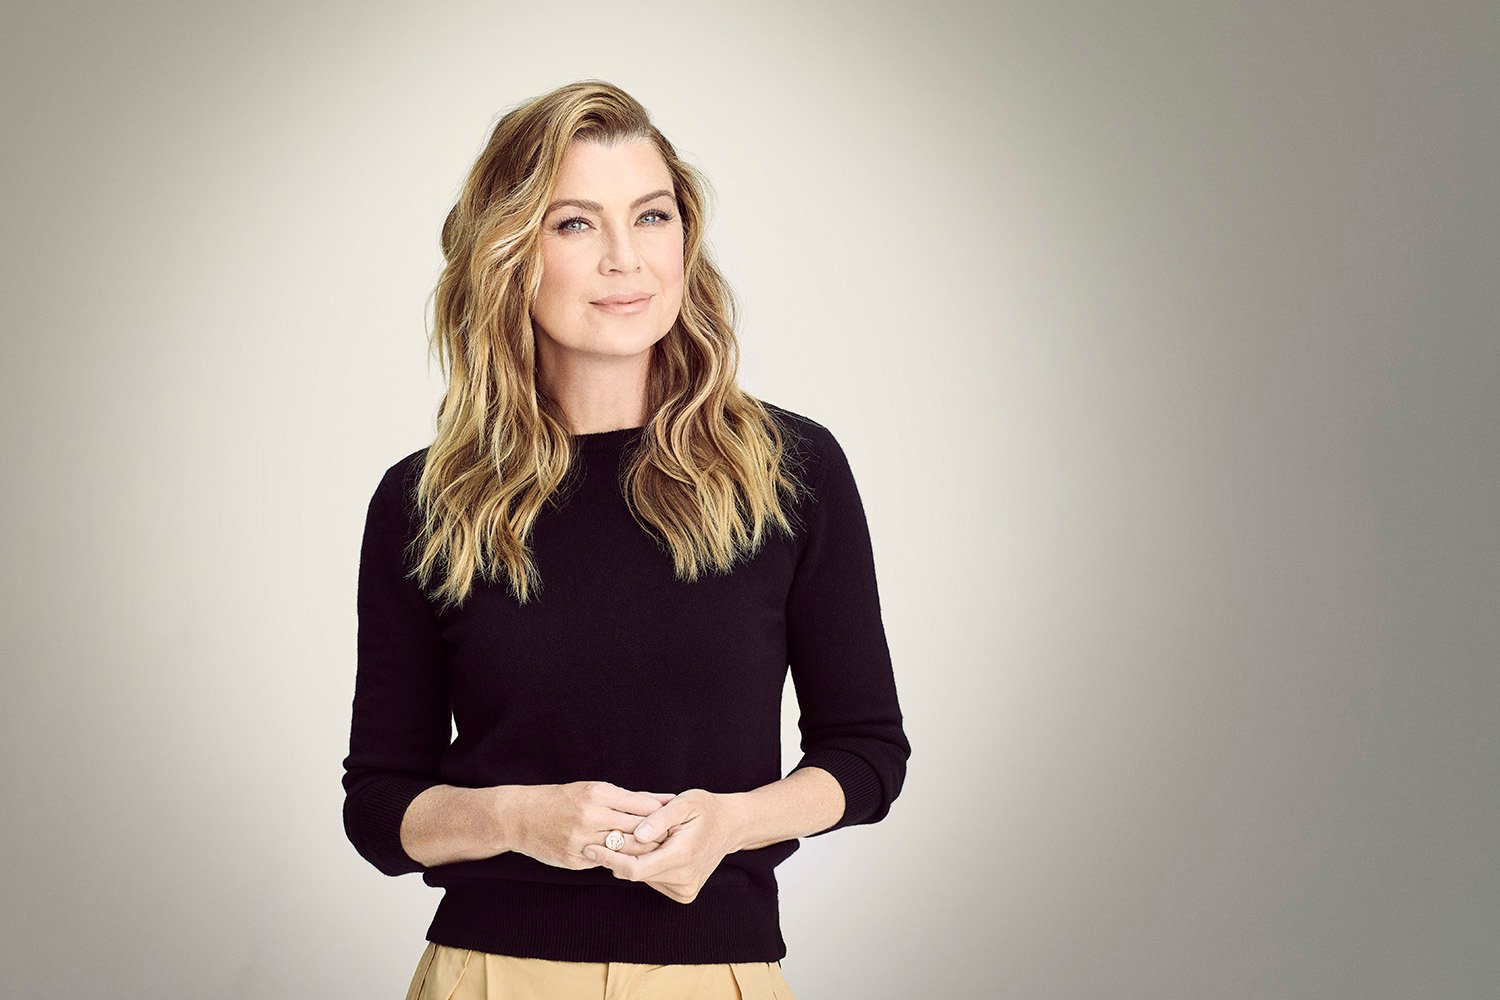 Grey's Anatomy Season 17 star Ellen Pompeo wearing a black top and beige pants and wearing her blonde hair down. She's standing in front of a solid grey background and staring at the camera.